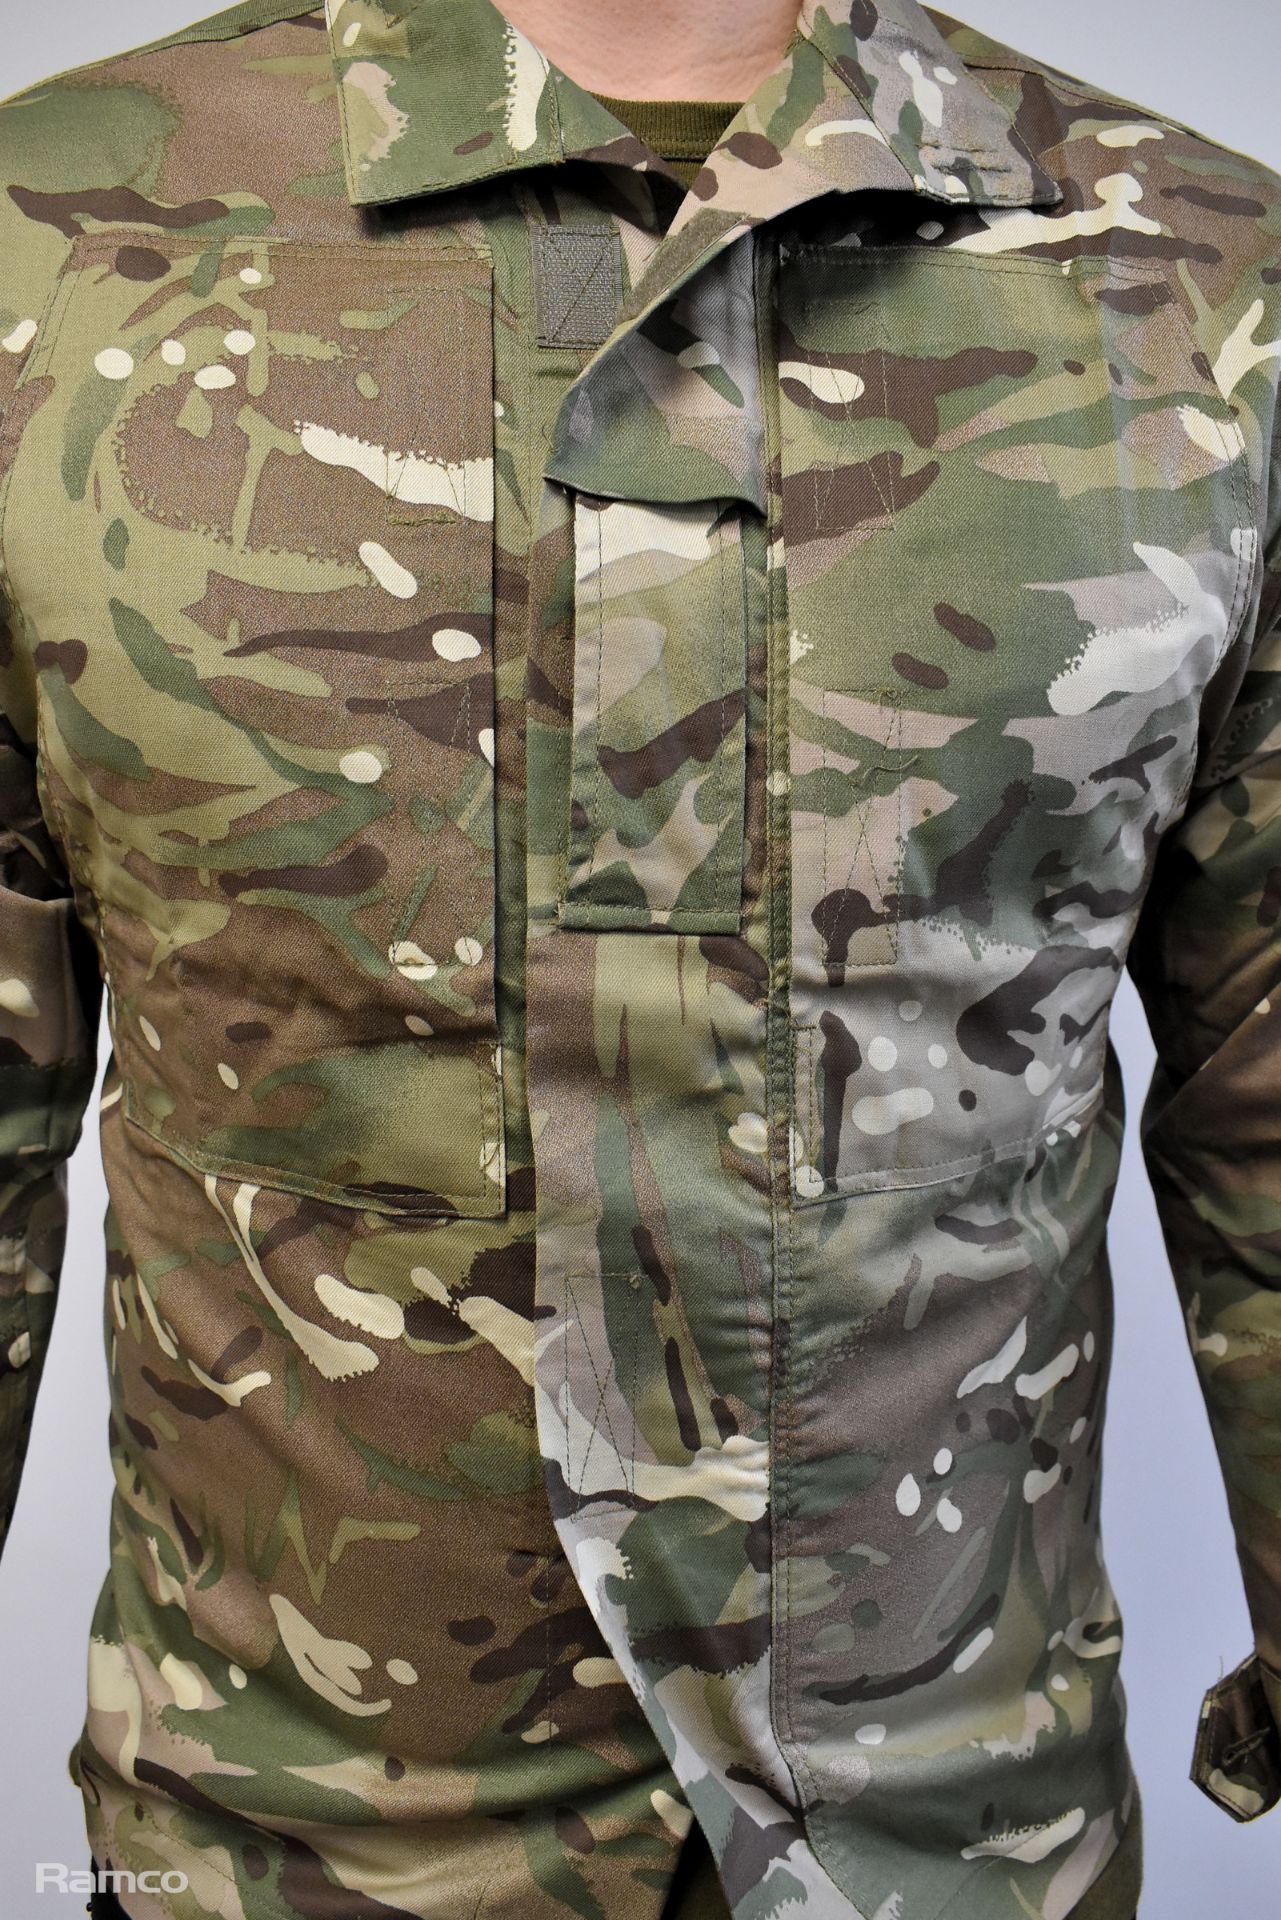 70x British Army MTP combat jackets - mixed types - mixed grades and sizes - Image 5 of 11